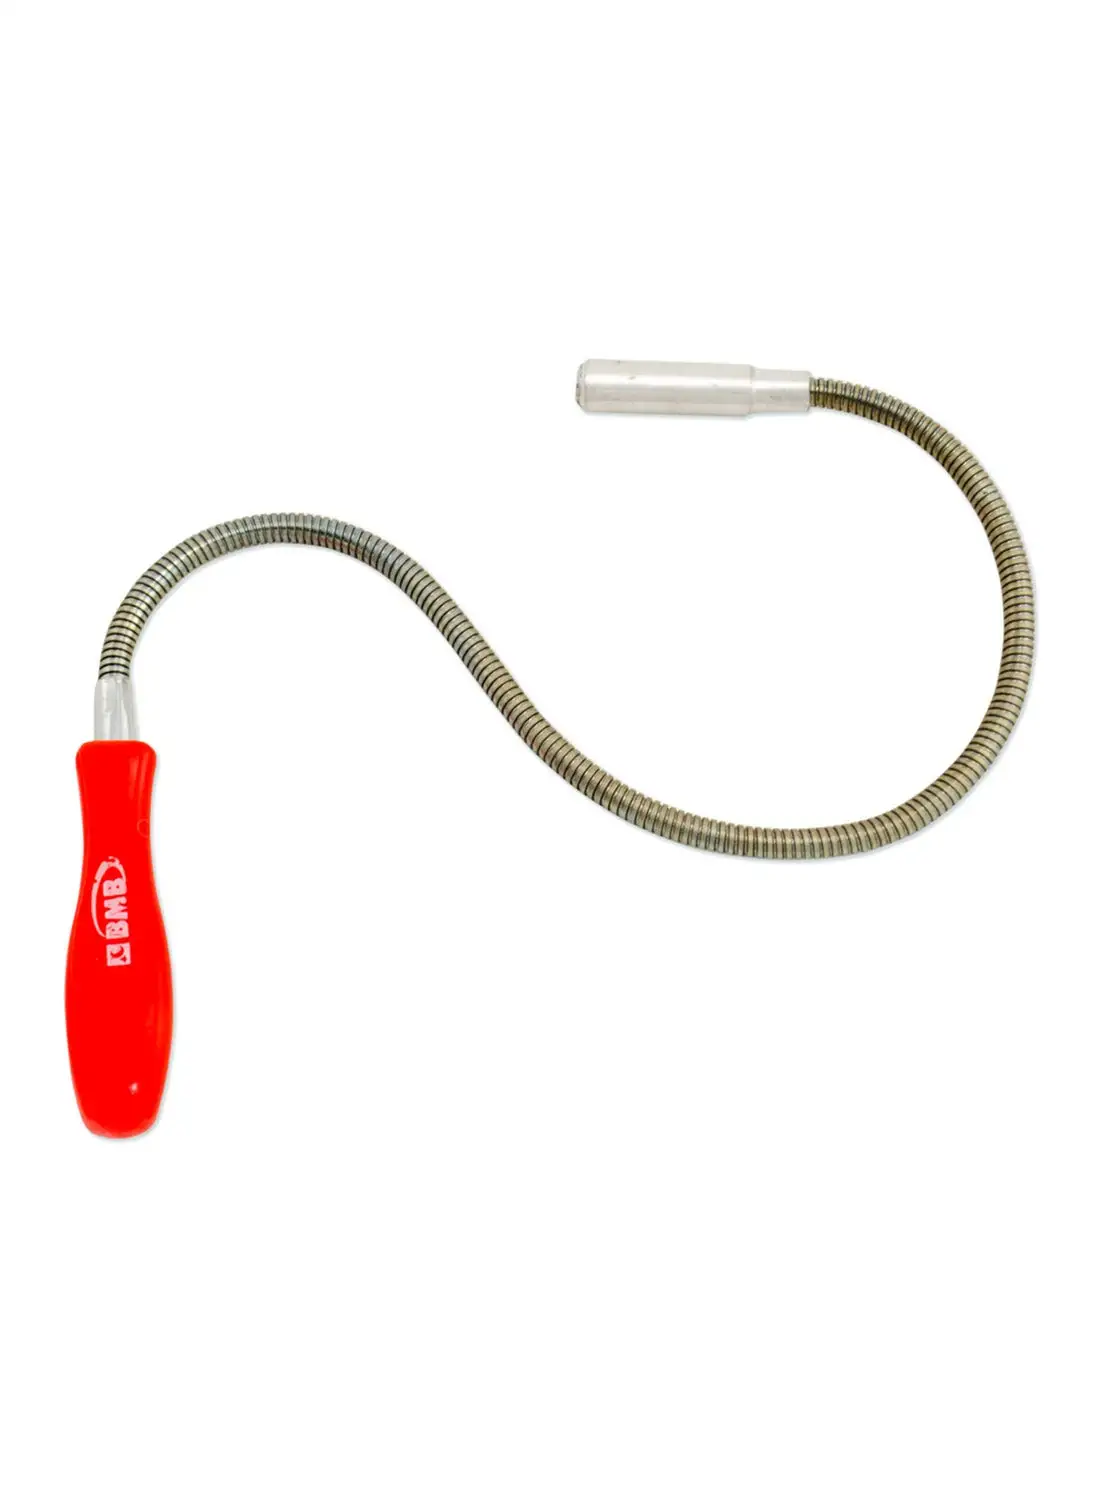 BMB tools Flexible Magnetic Claw Pick Up Red/Silver 22.5inch